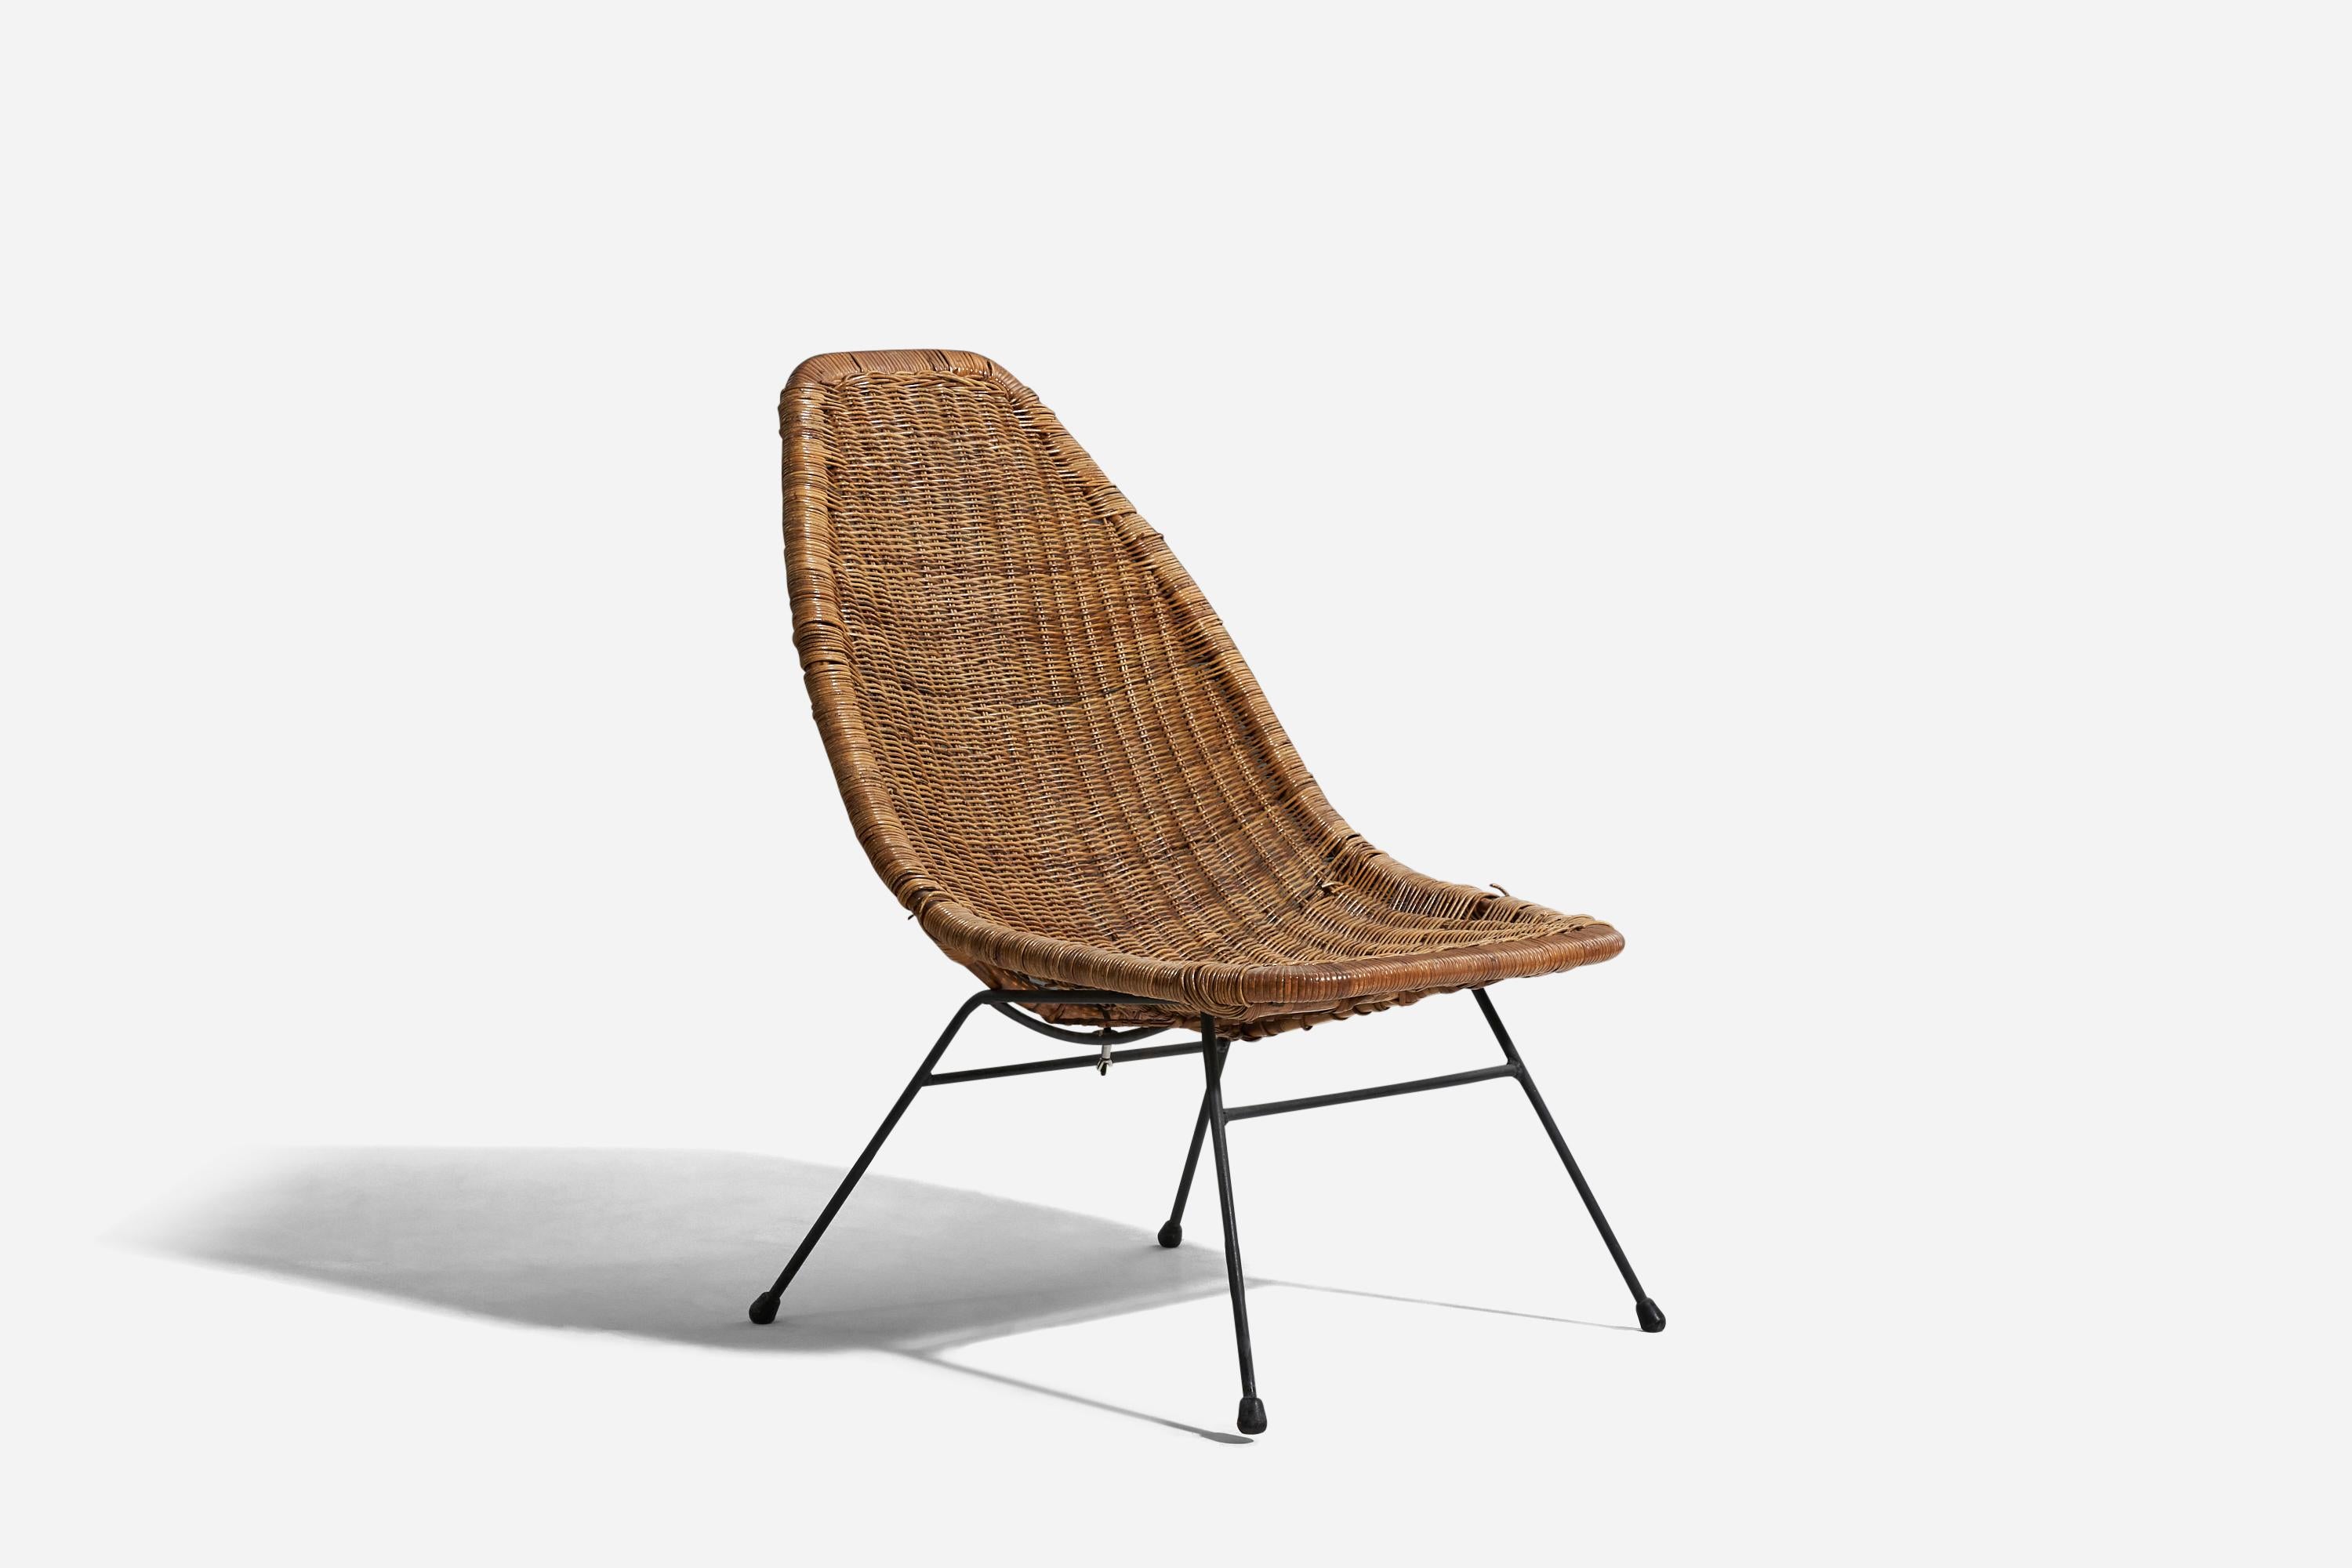 A rattan and metal lounge chair designed and produced by an American designer, United States, 1950s.






